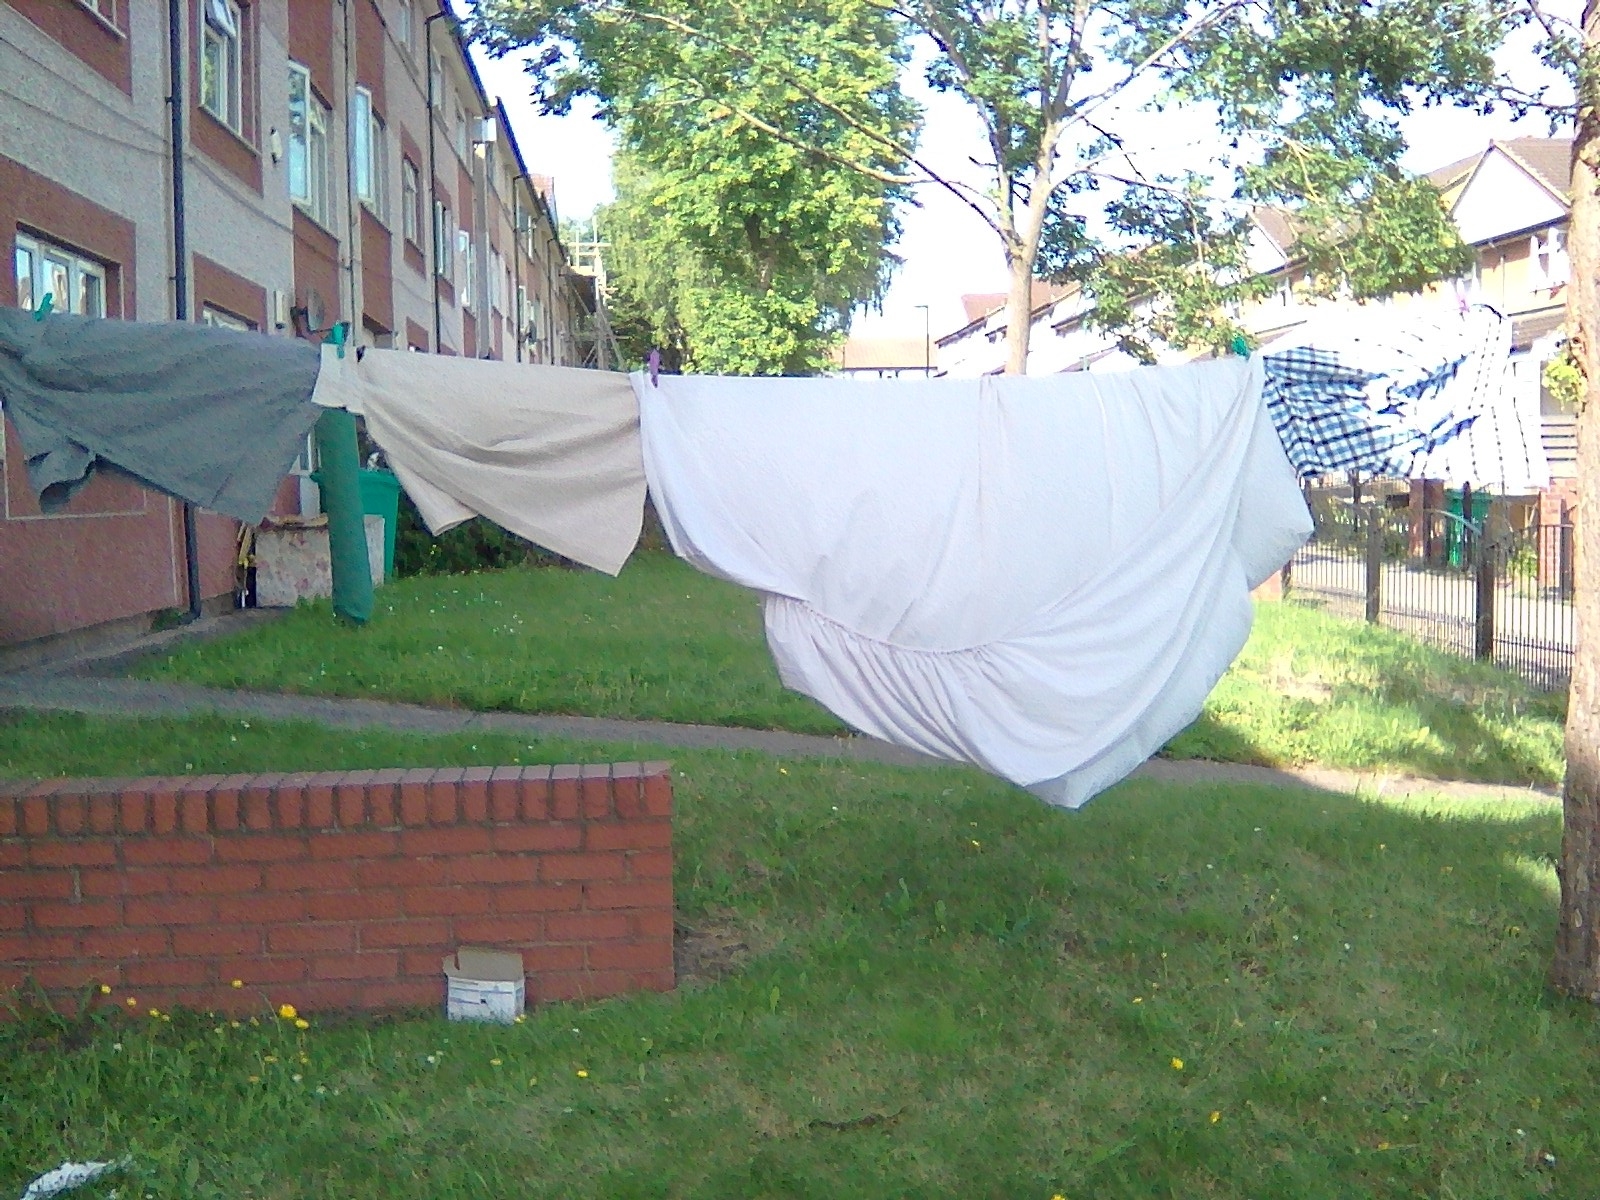 Clothes while on a wire having been washed in Nottingham, England